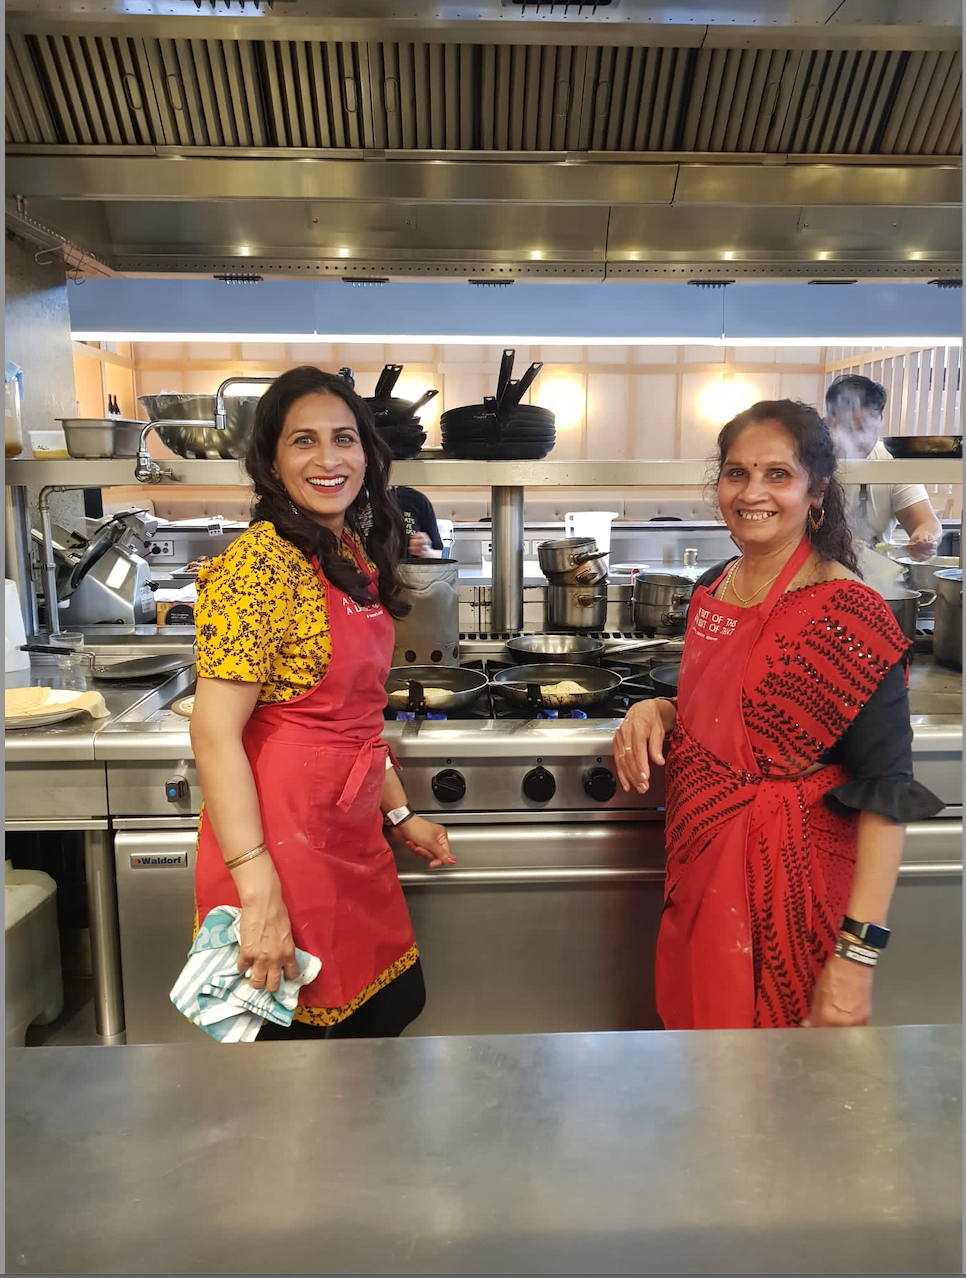 Laxmi in sari and Jayshri in dress and apron standing in commercial kitchen; share what they love about their cookbook and why it's the only thing you'll need to produce dishes for your family in an Authentic Gujarati home cooked way - the way of mum